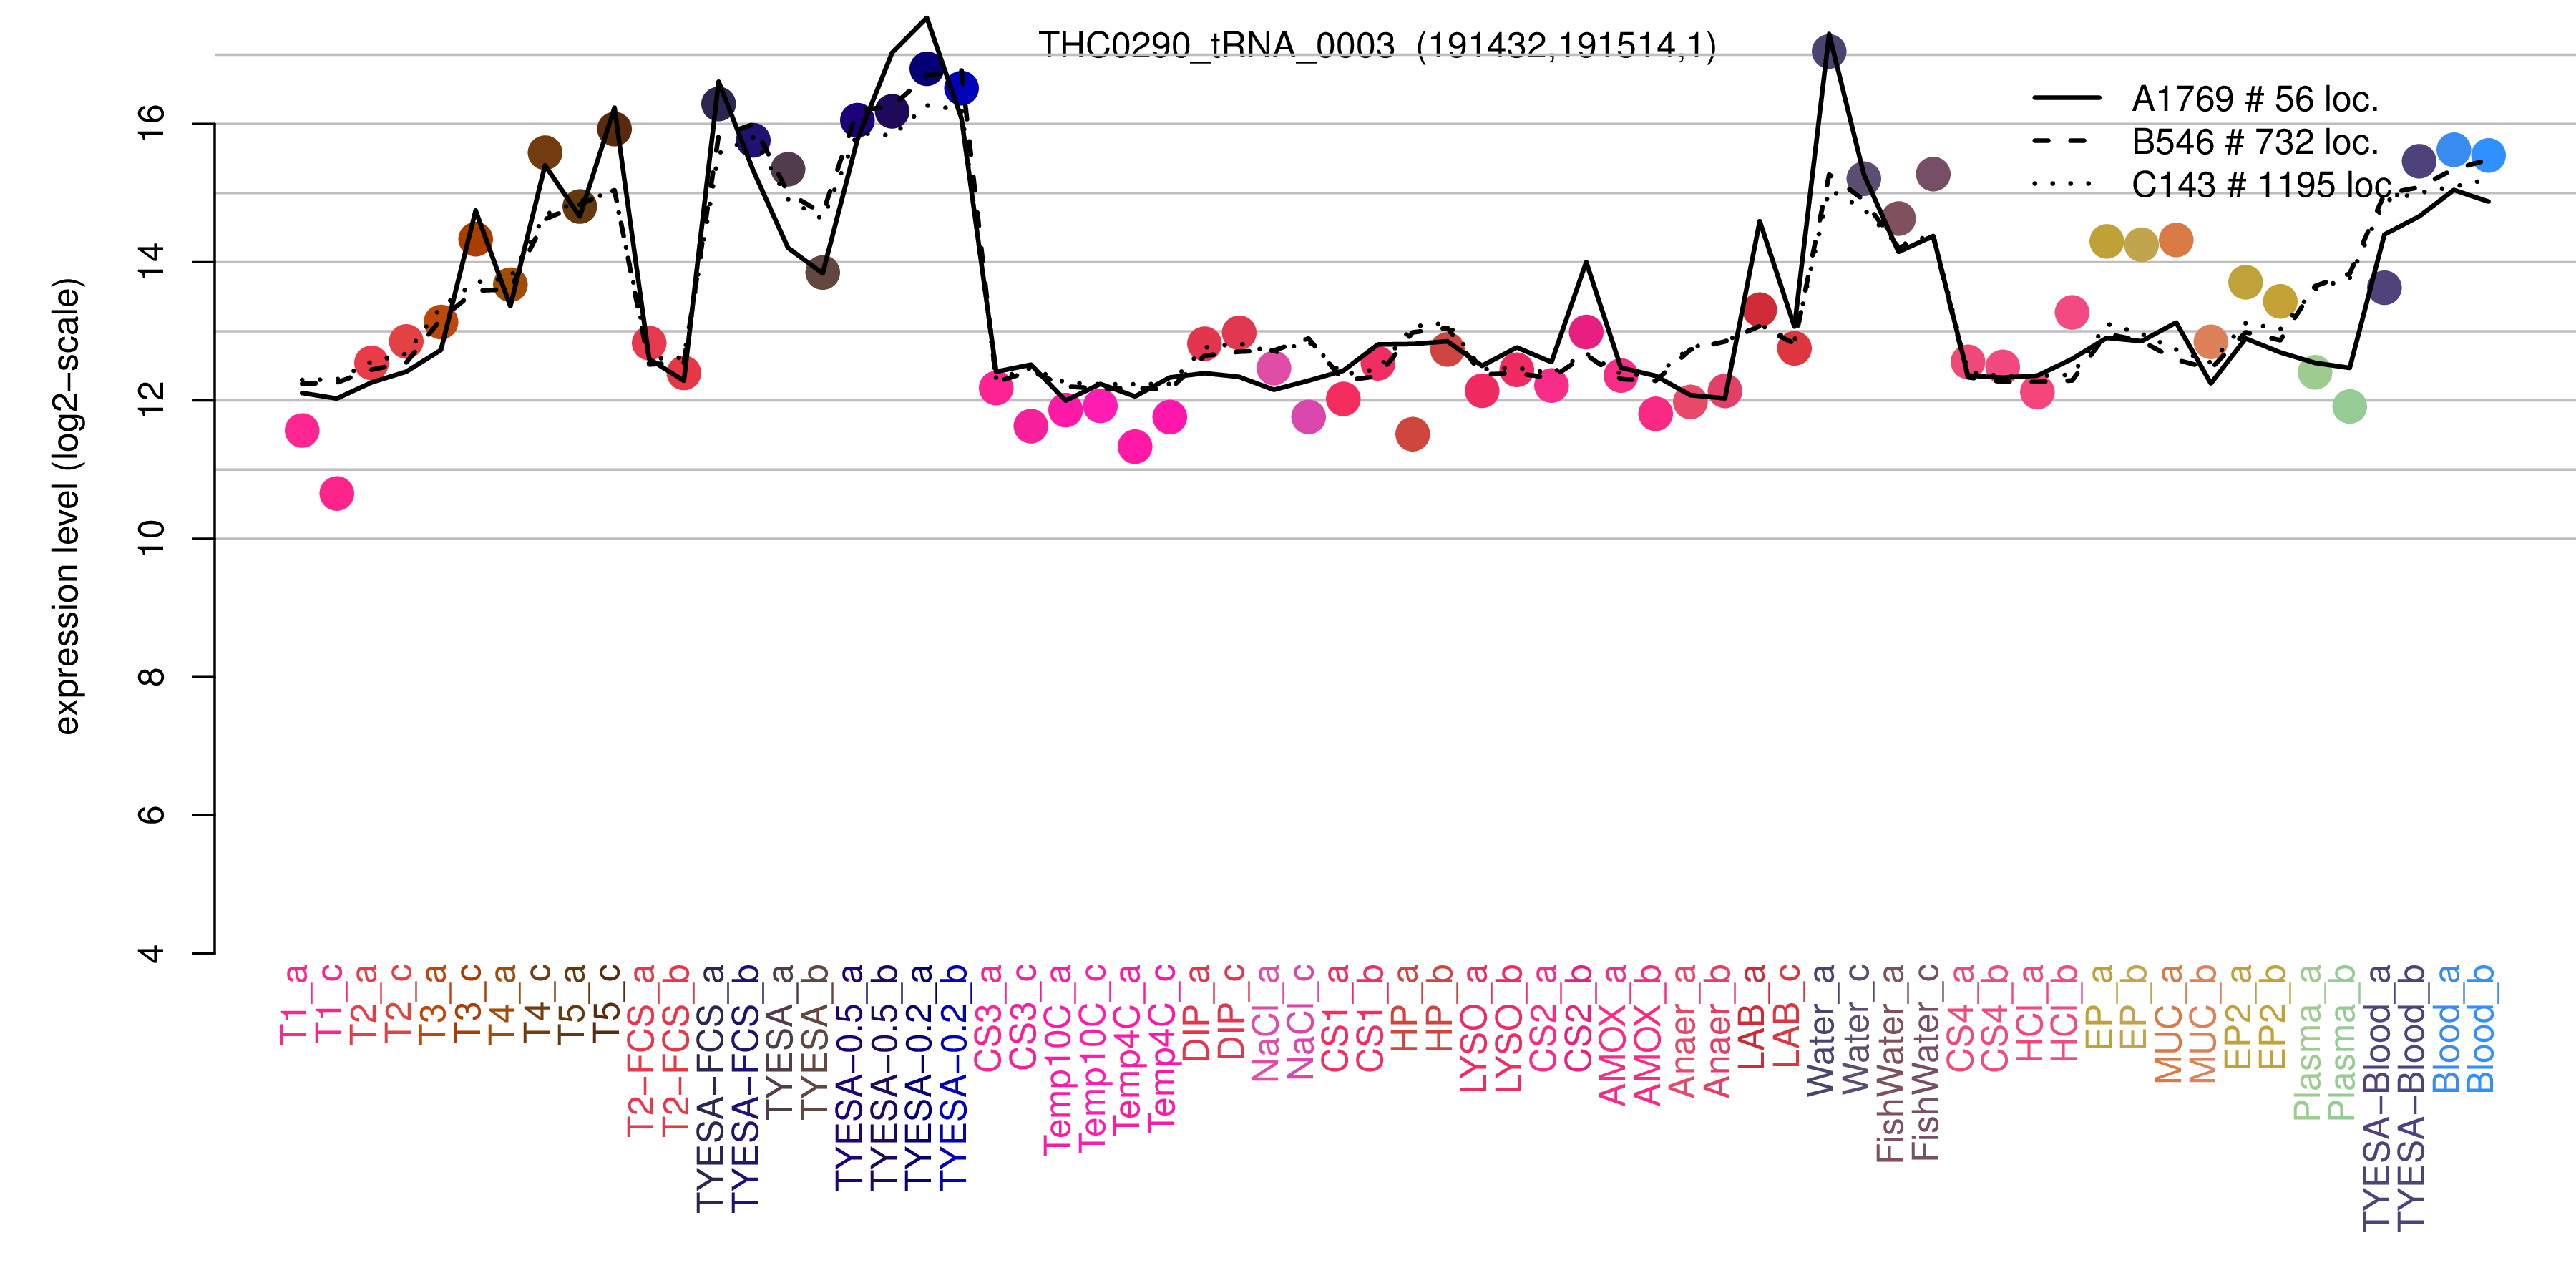 THC0290_tRNA_0003 expression levels among conditions